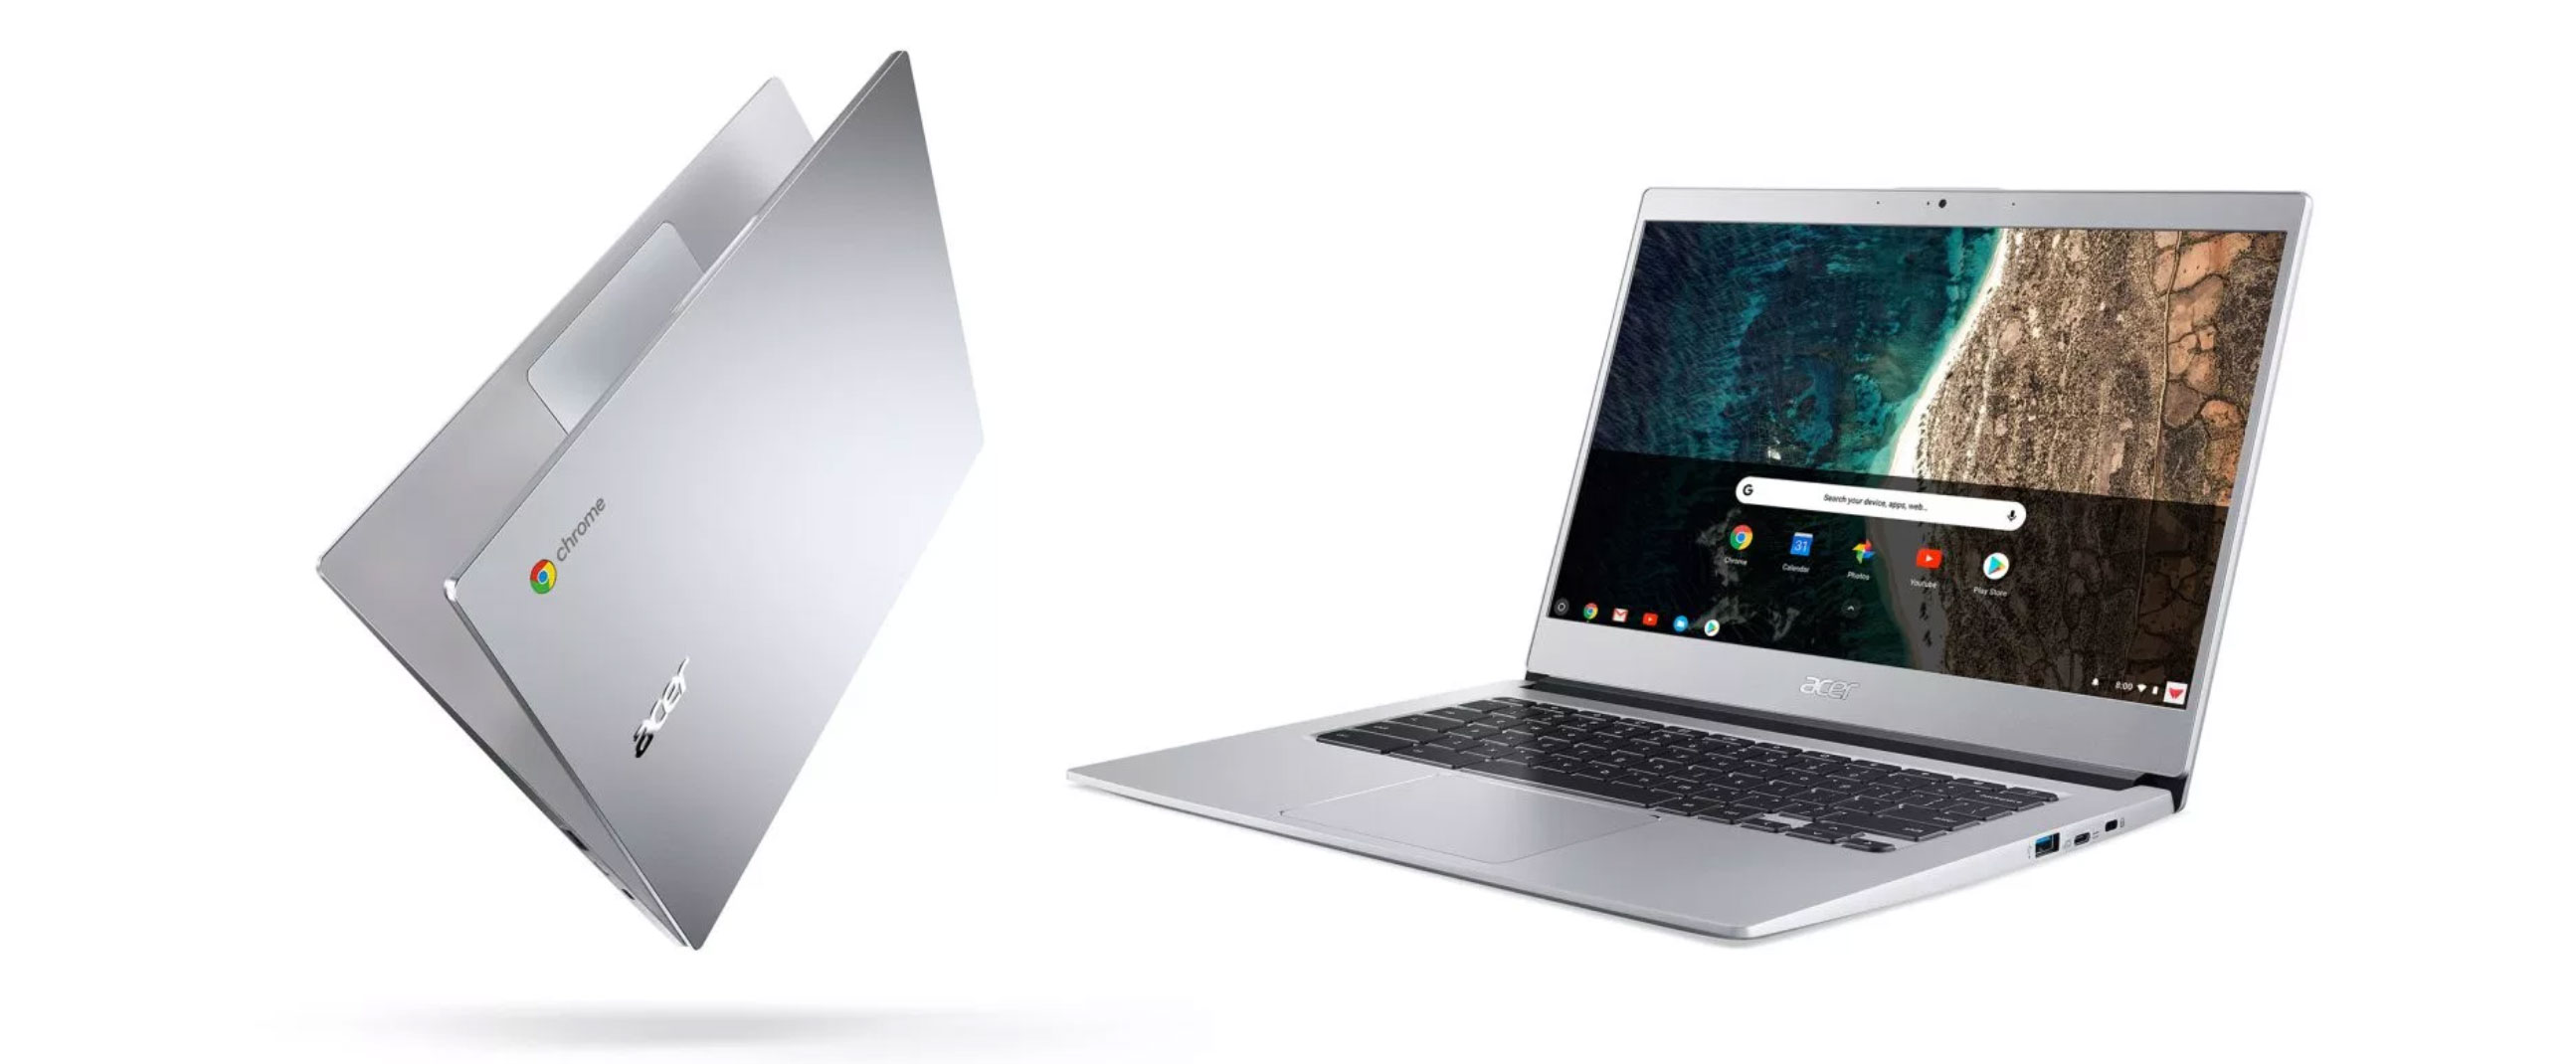 The latest 14-inch Acer Chromebook is smaller and better specked